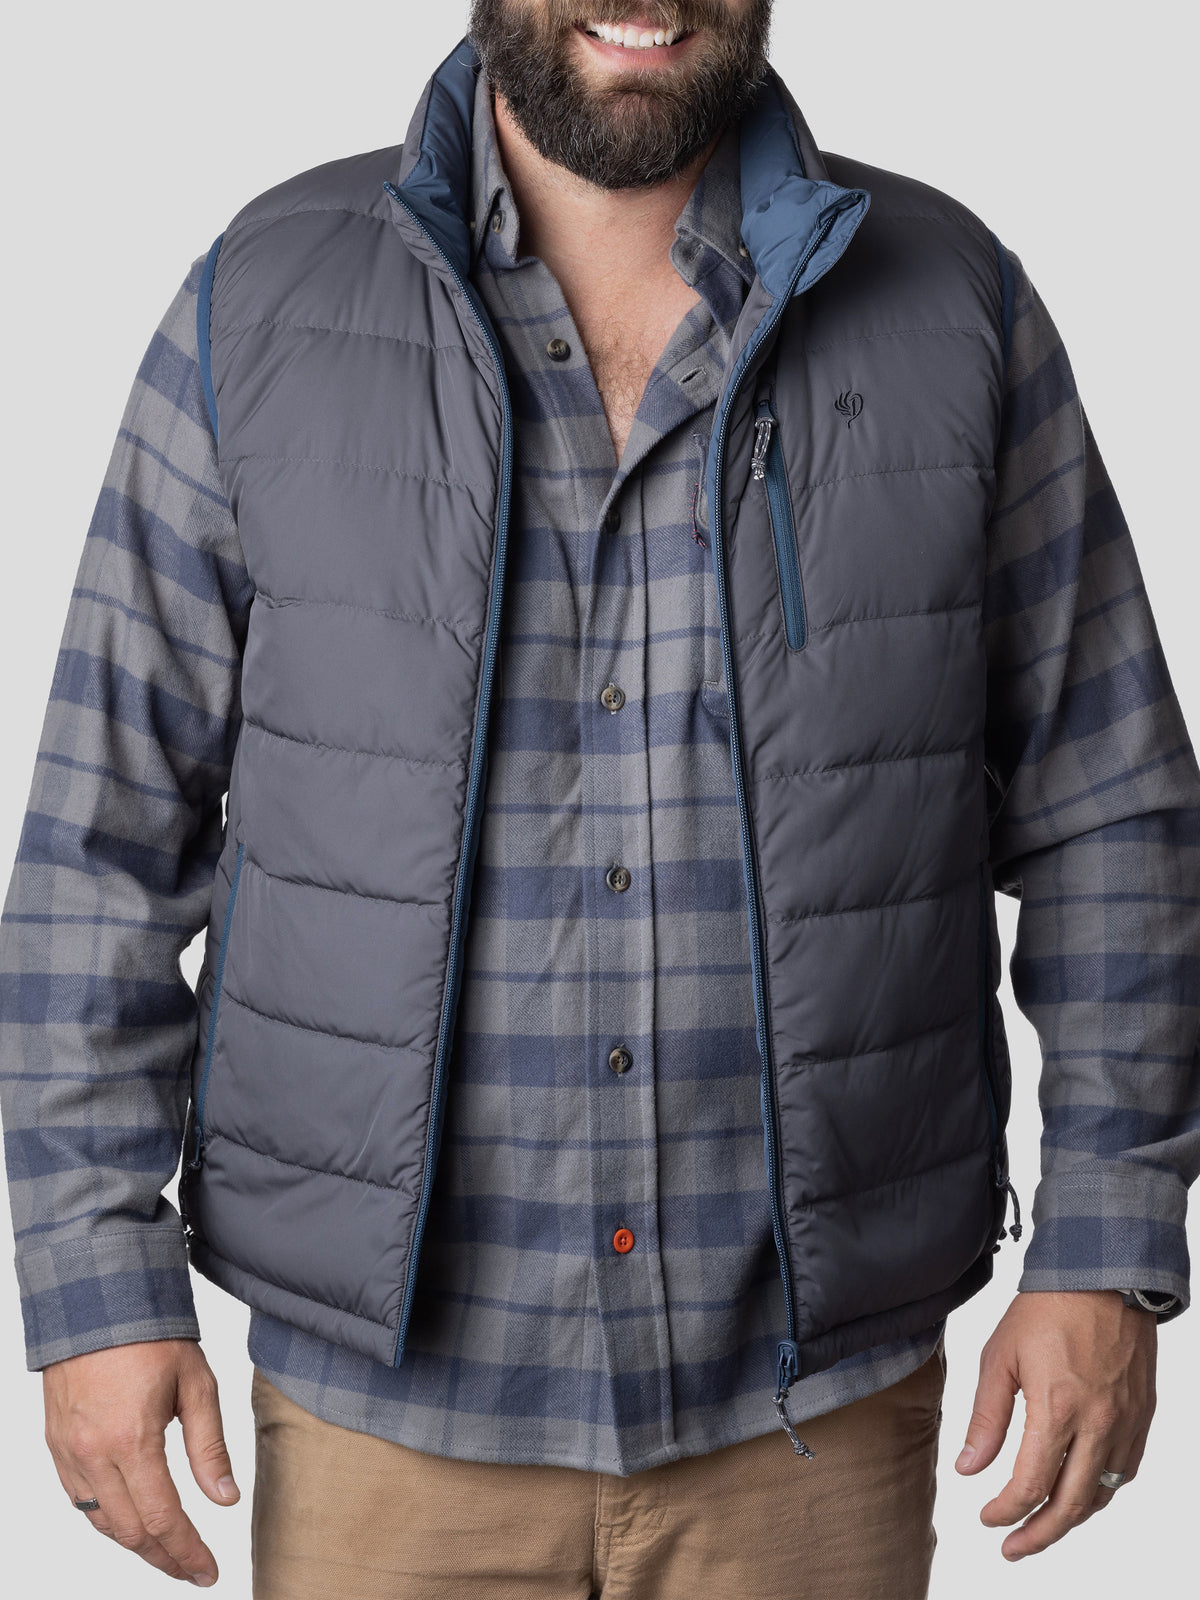 DryDown Reversible Vest - Faded Navy/Charcoal